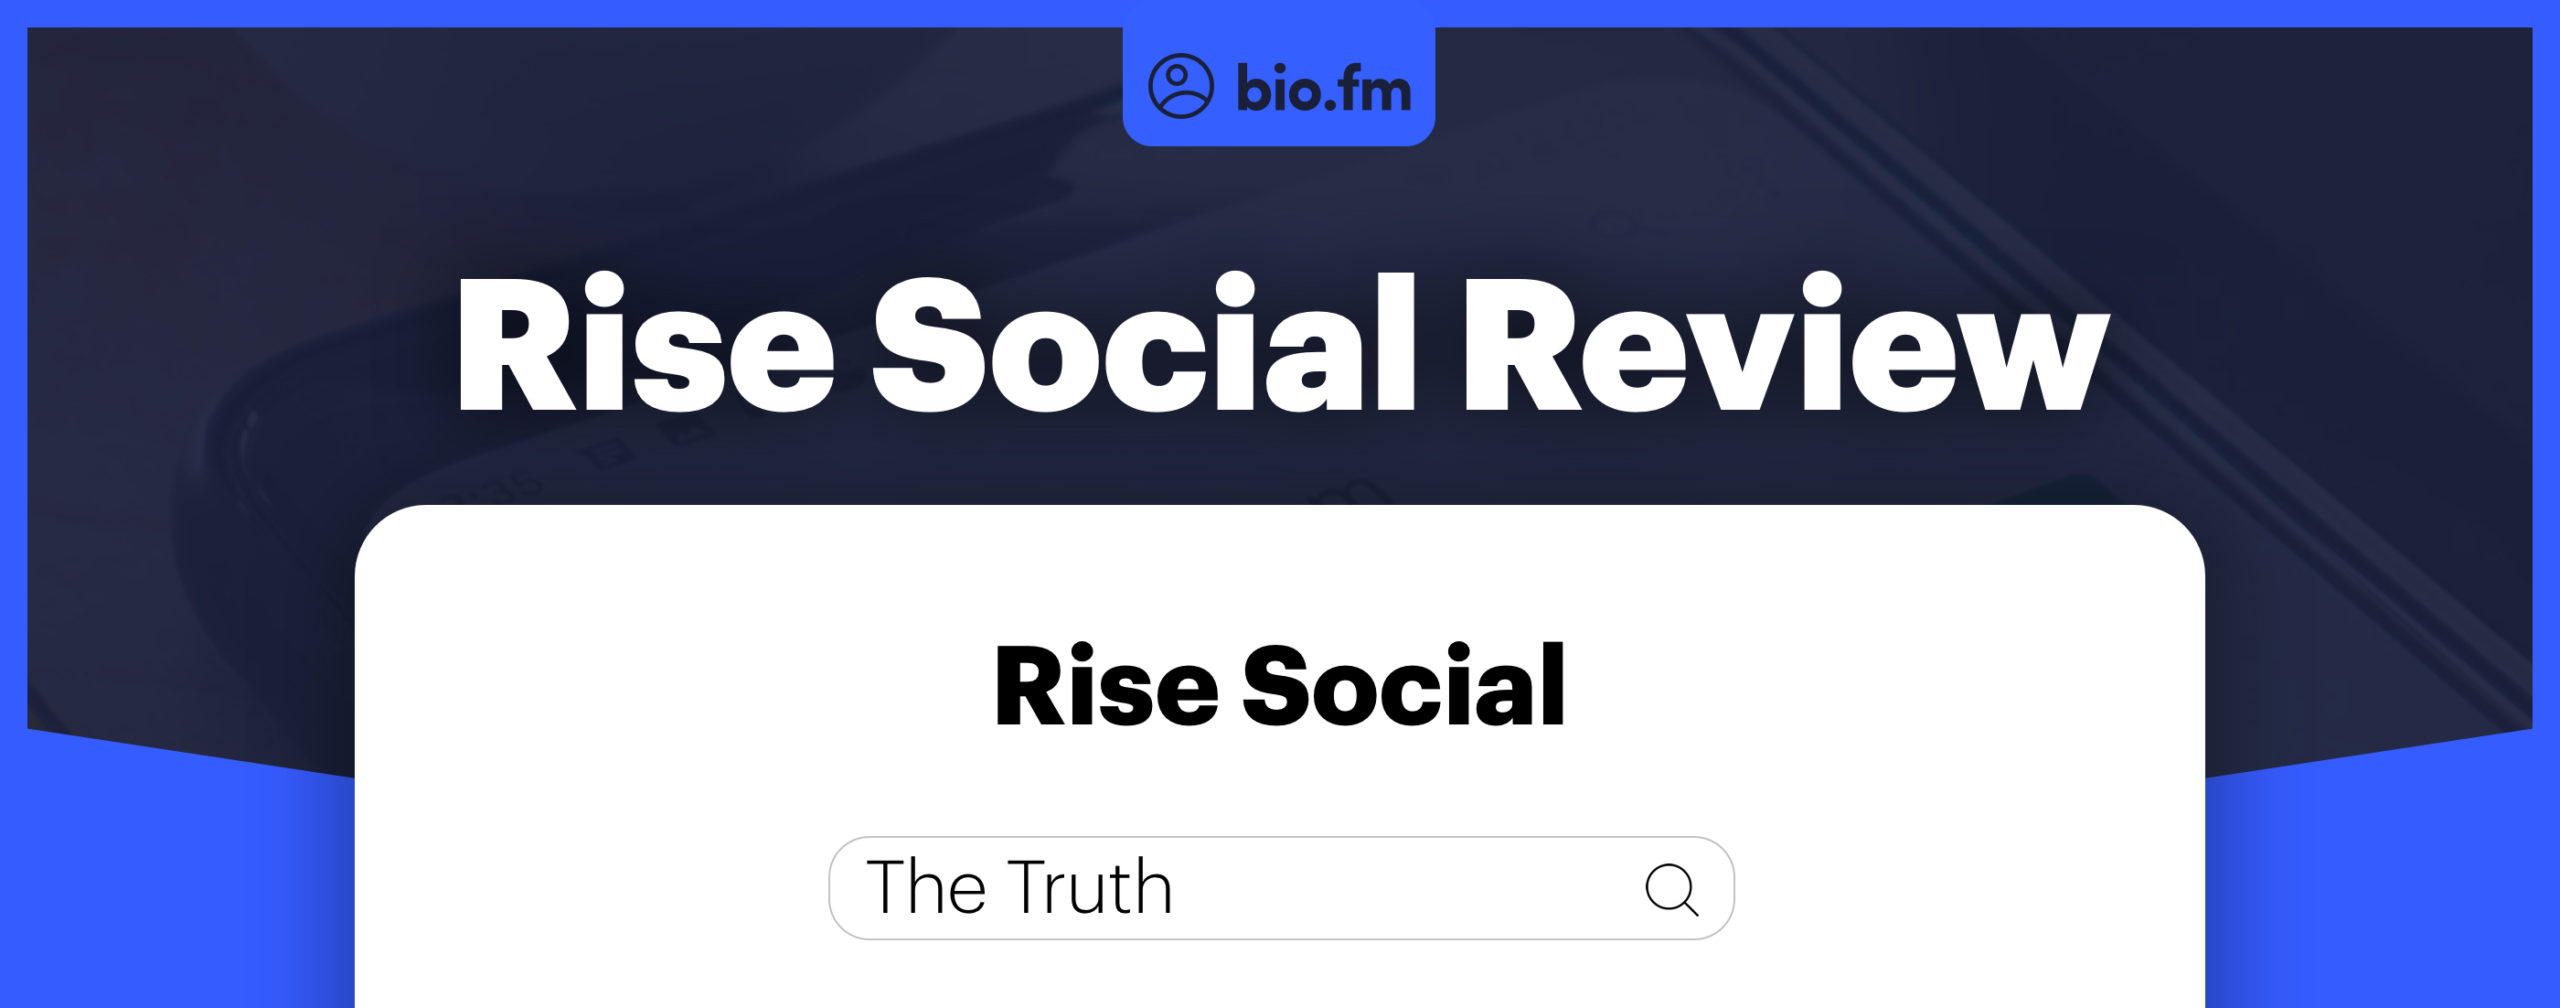 risesocial featured image